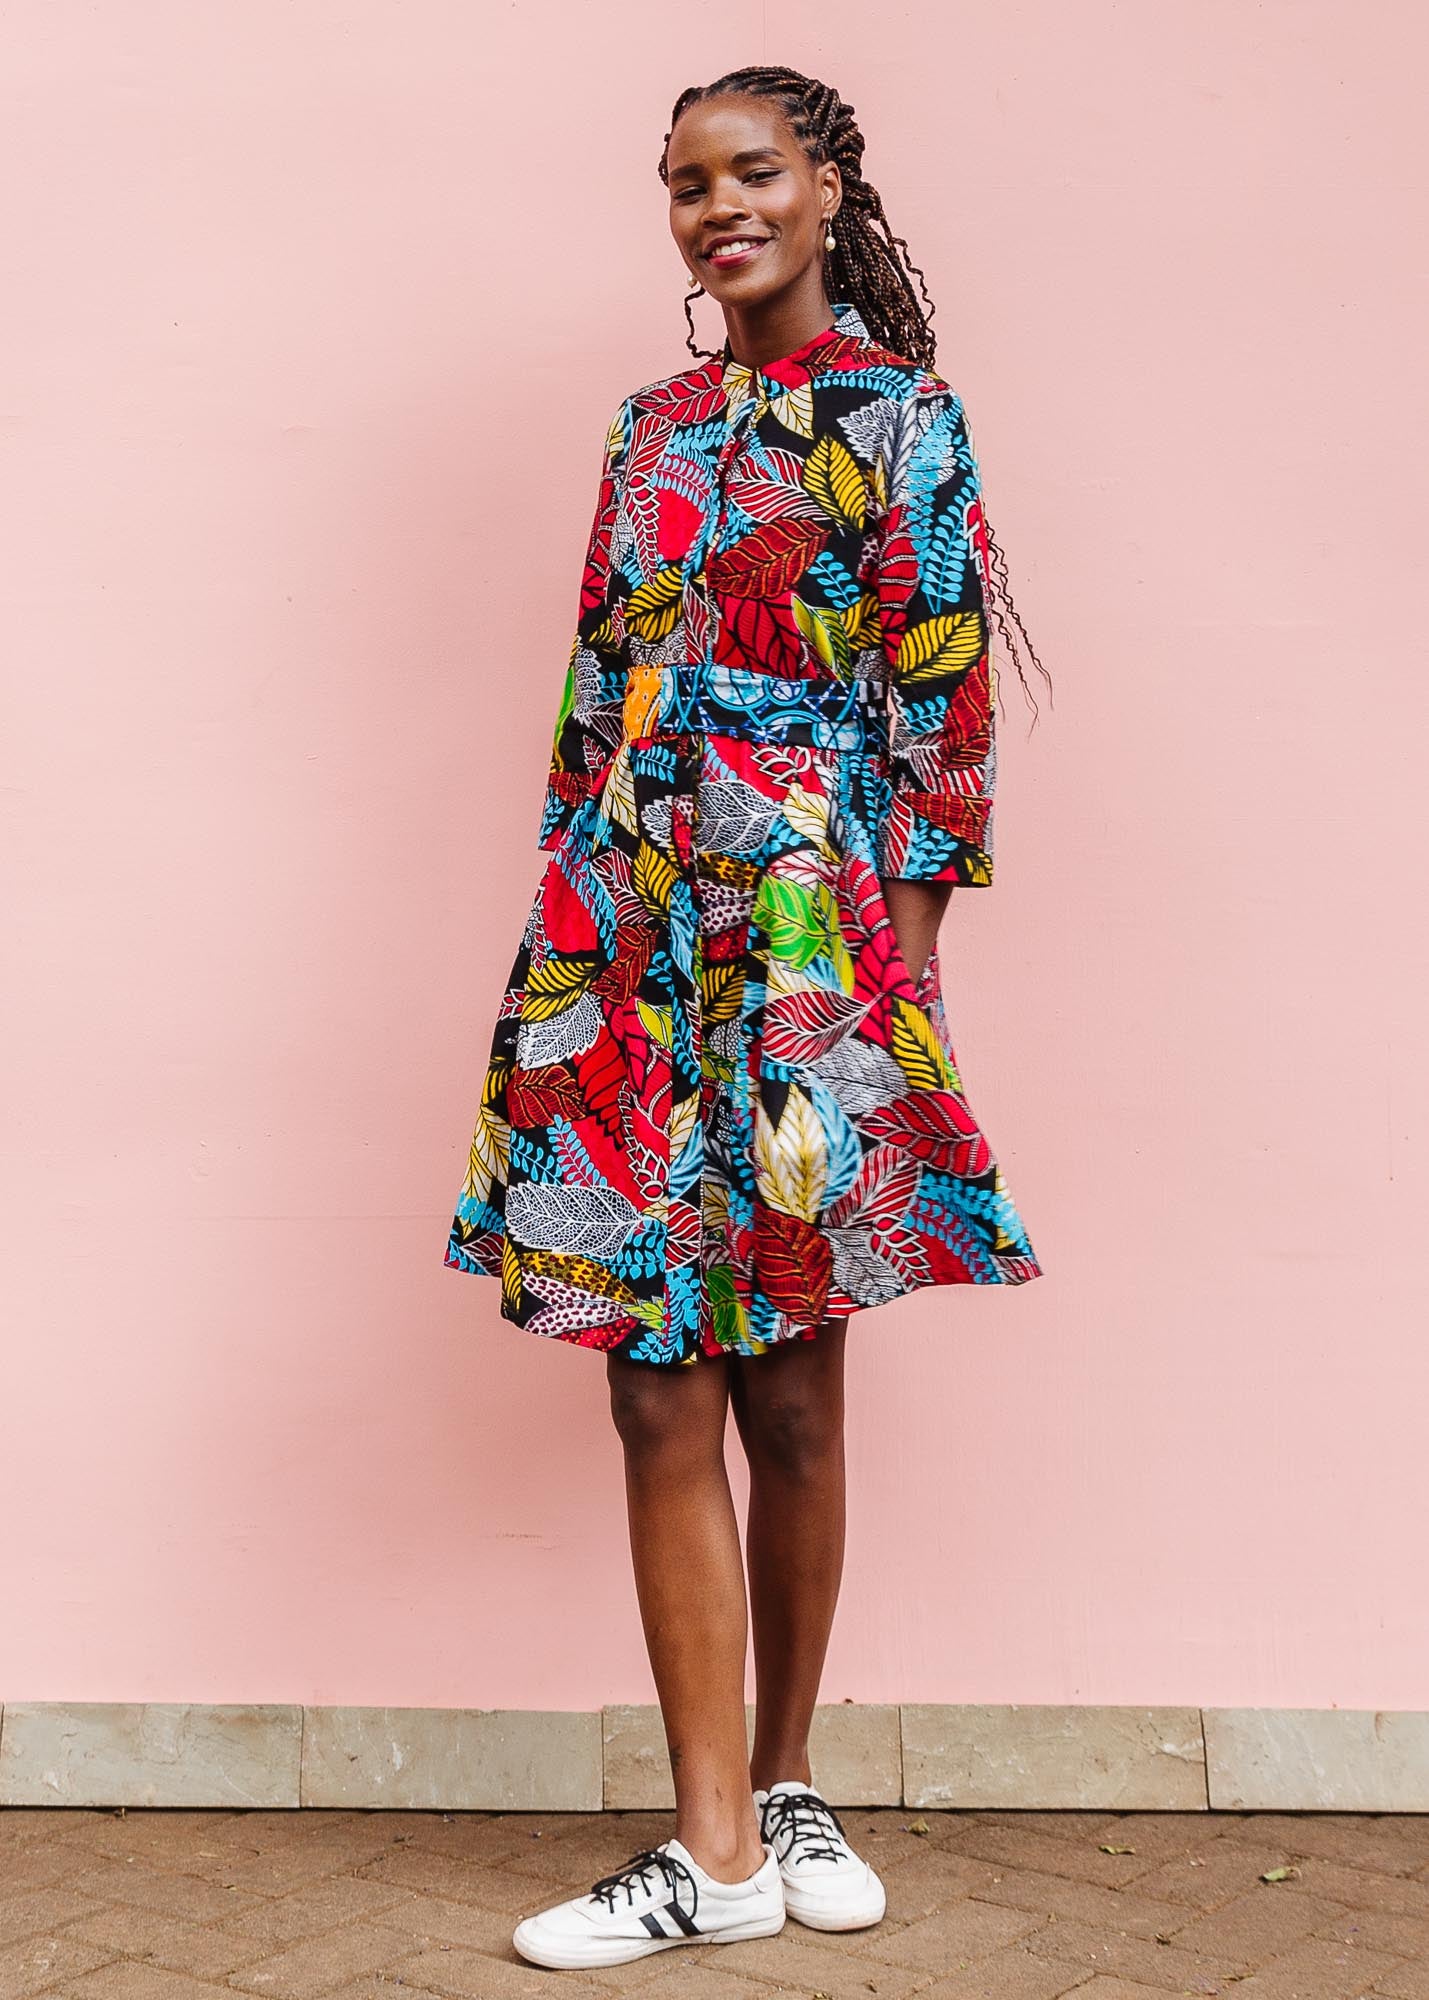 The model is wearing multi-colored leaf print dress